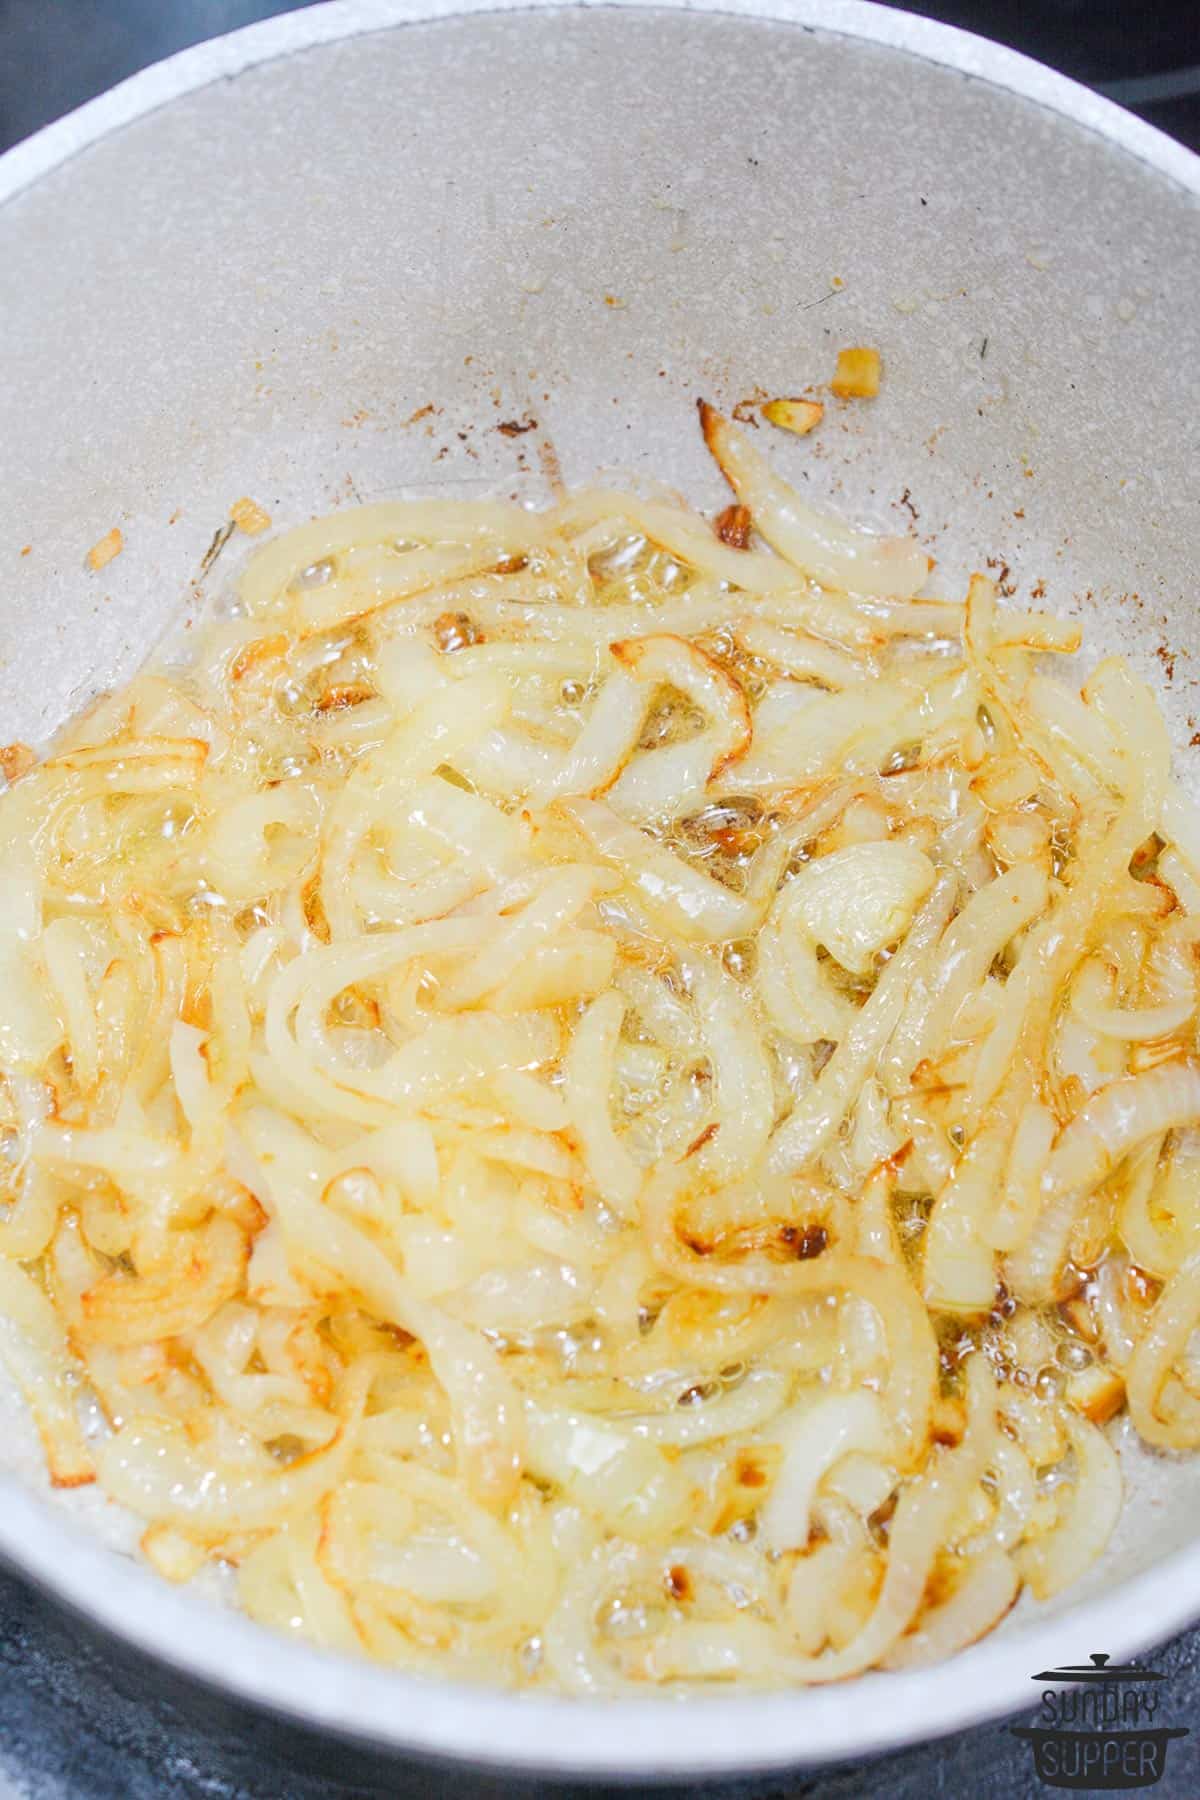 The onions cooked until soft and starting to brown